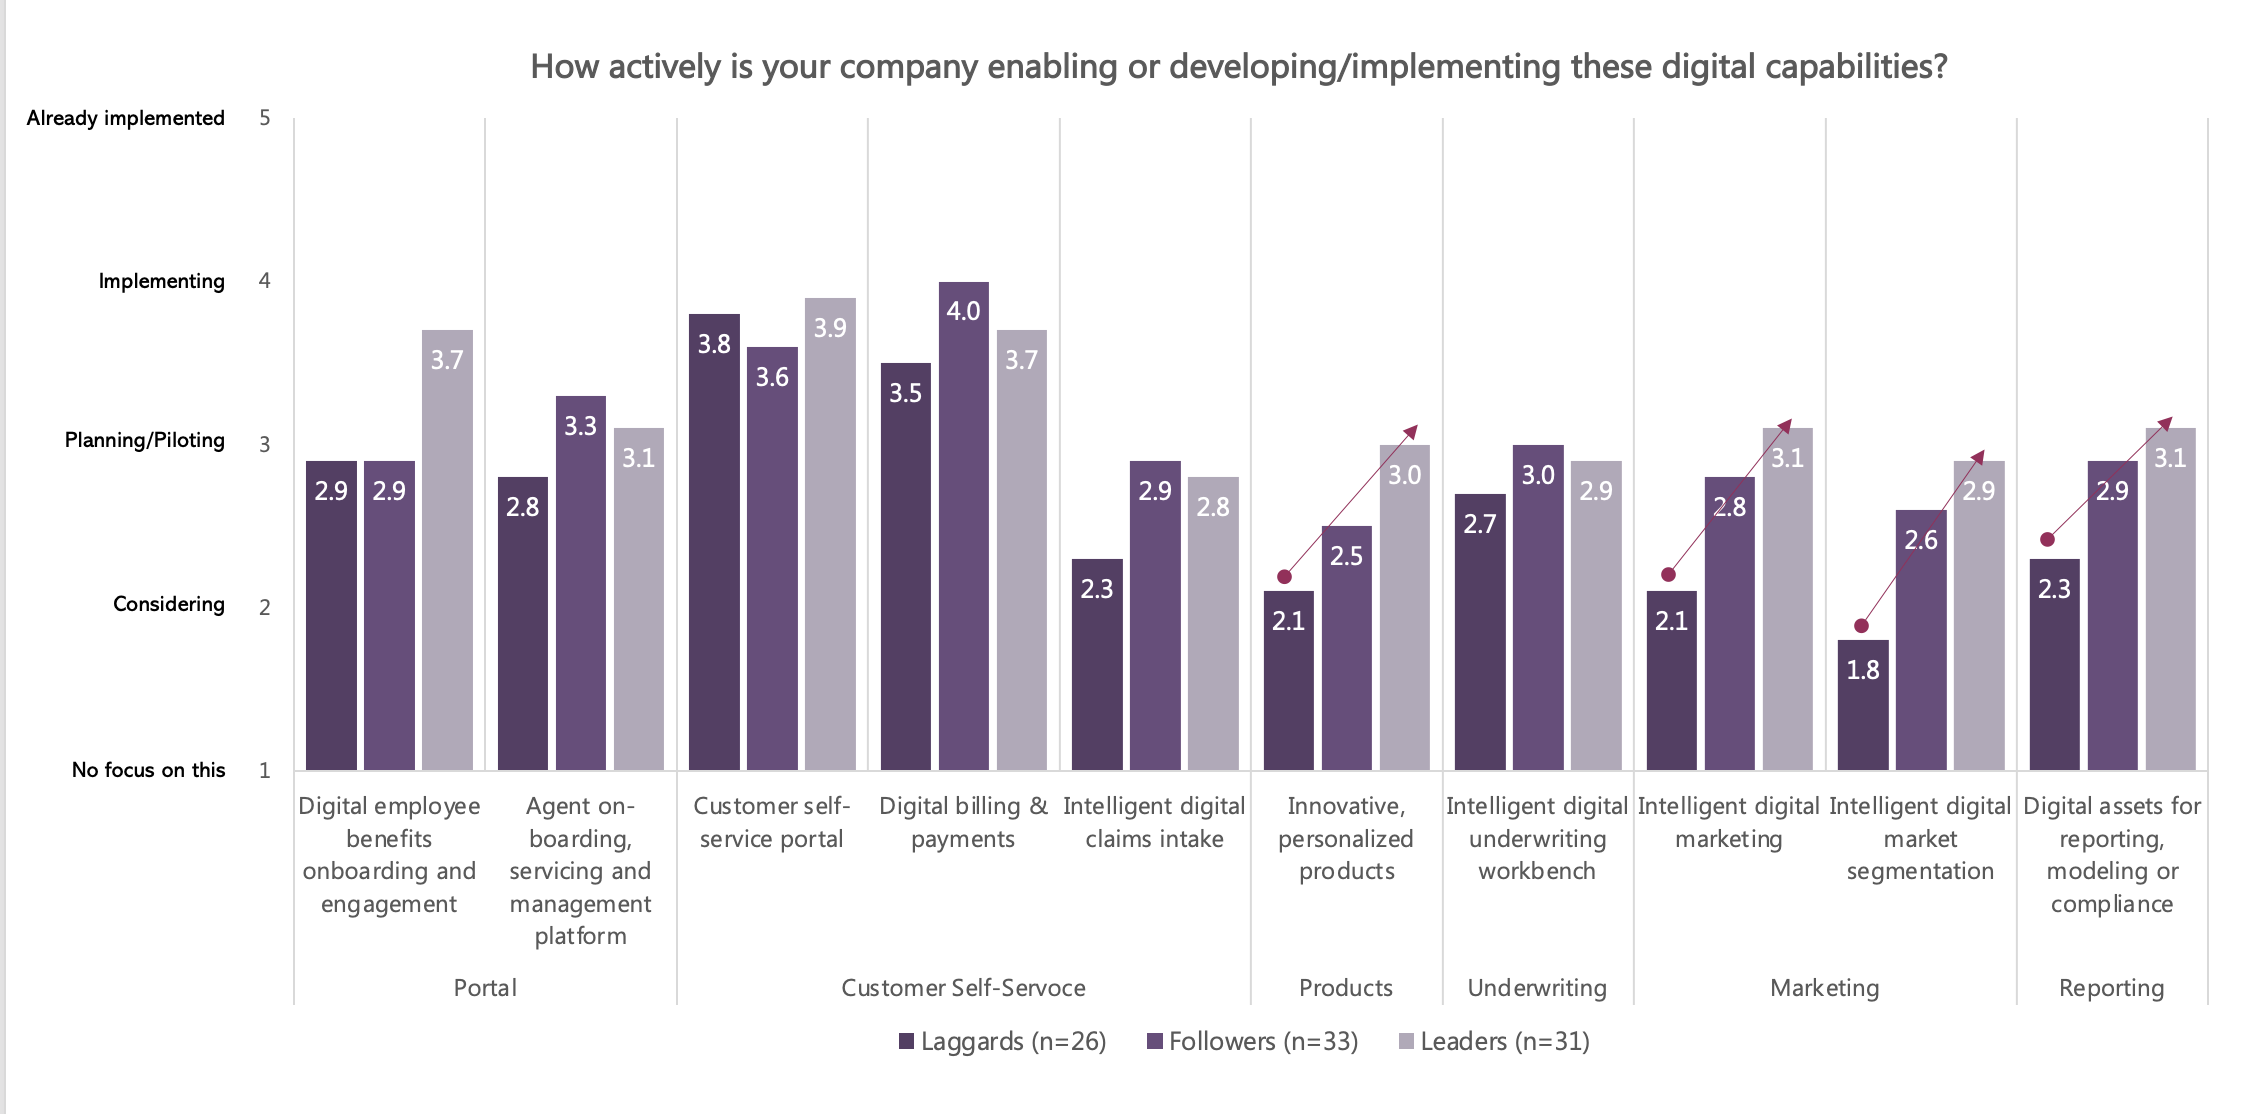 Leaders, Followers and Laggards responses to developing/implementing digital capabilities